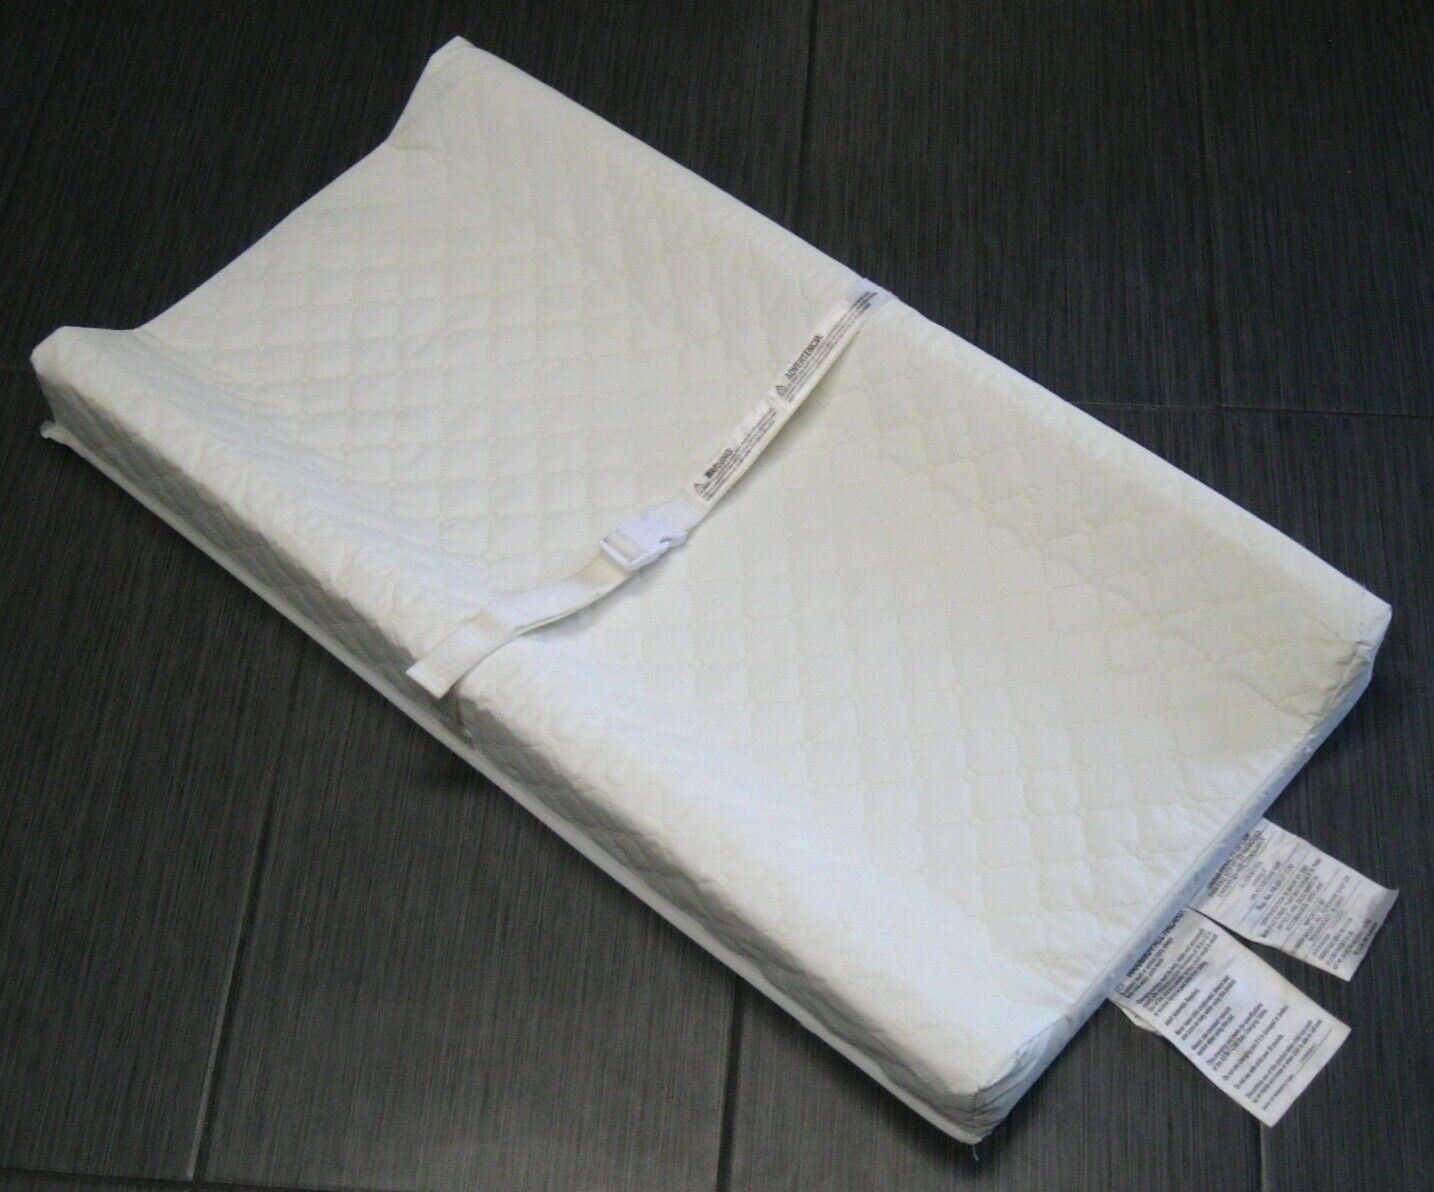 Primary image for SUMMER INFANT Baby Child Contoured WHITE CHANGING PADS with Belt Buckles